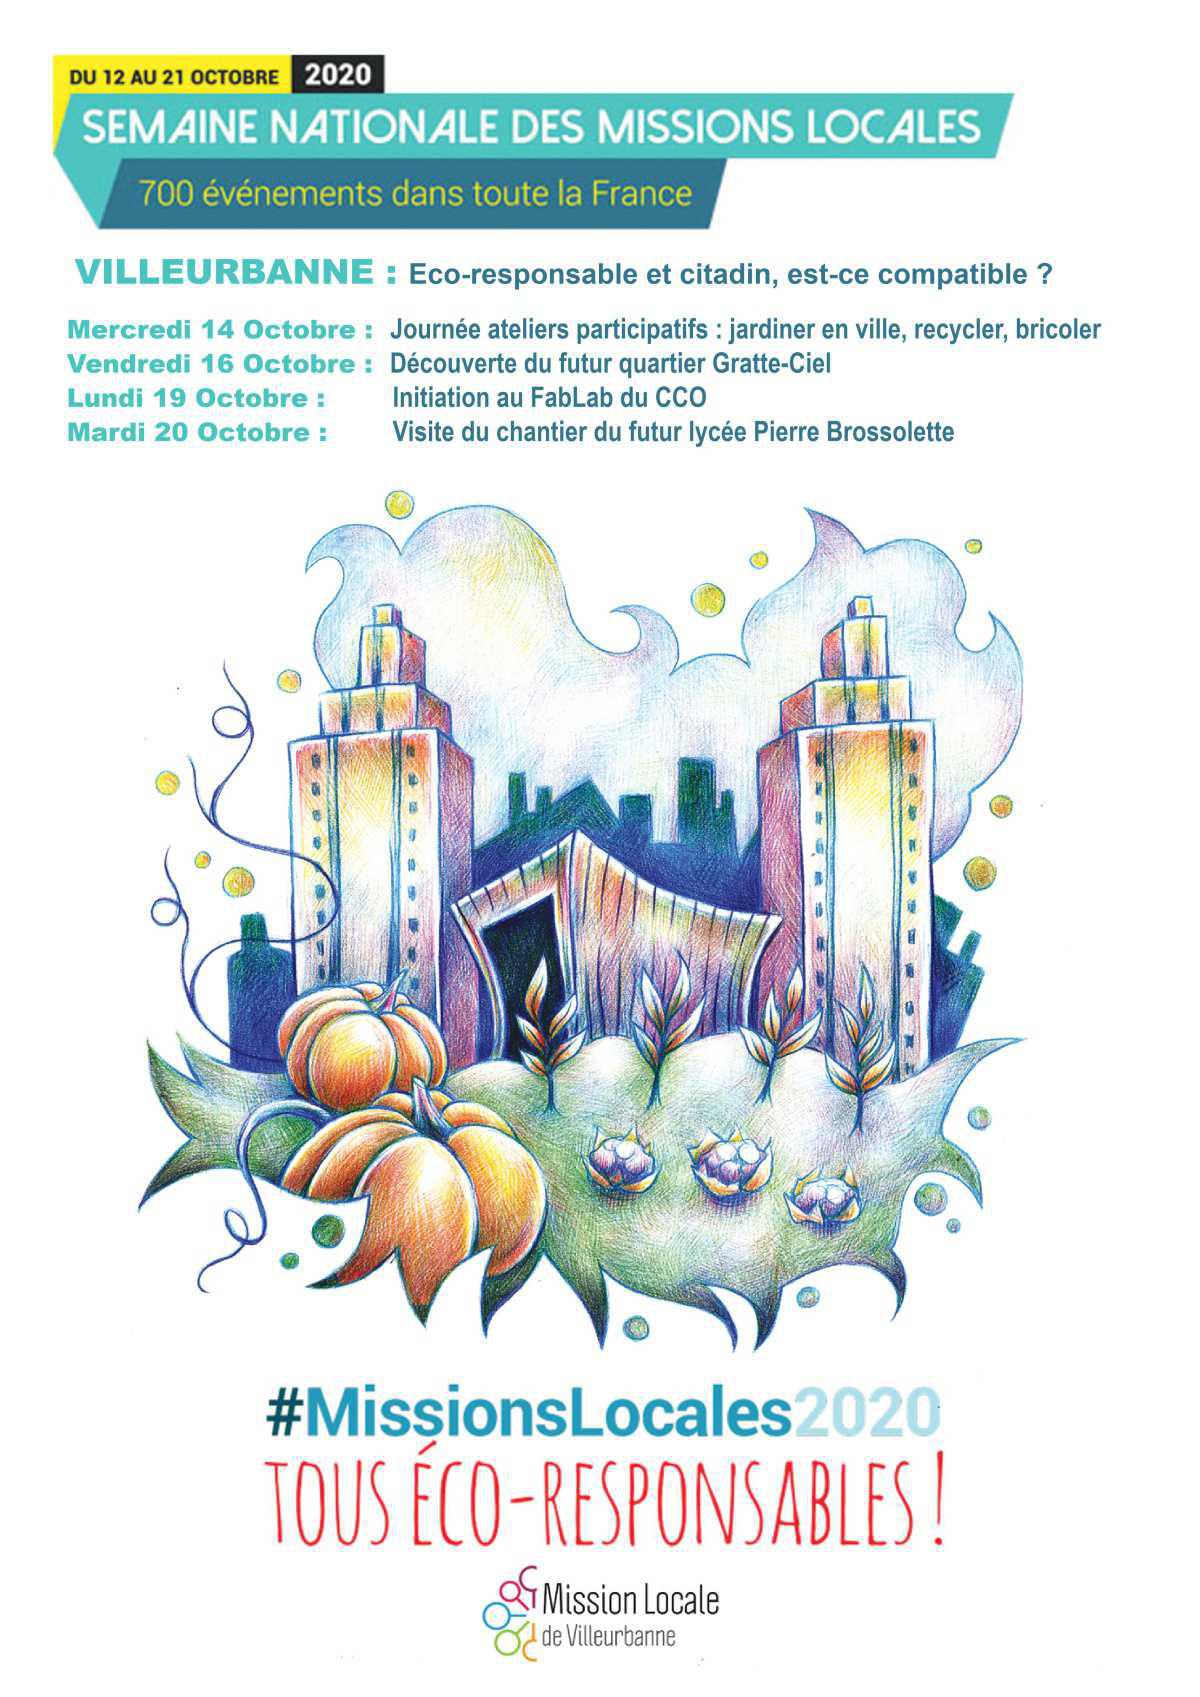 Semaine des Missions Locales - #MissionsLocales2020